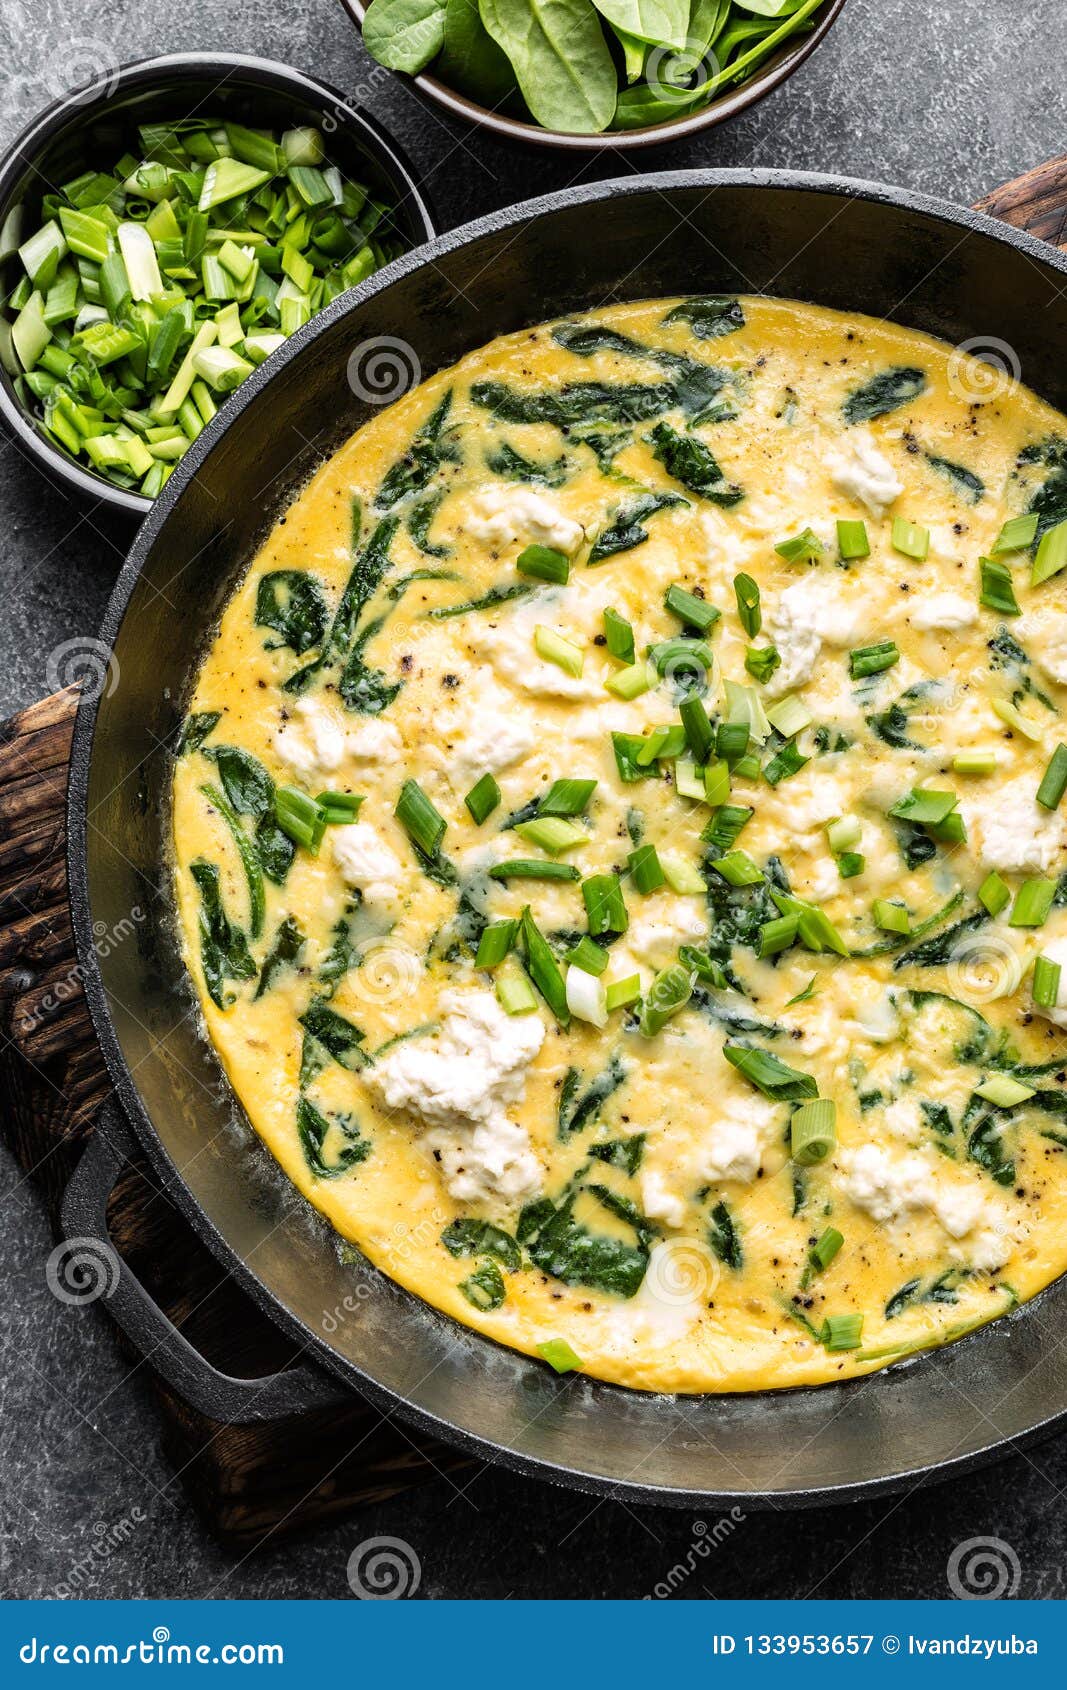 omelette with spinach and cheese in a pan top view